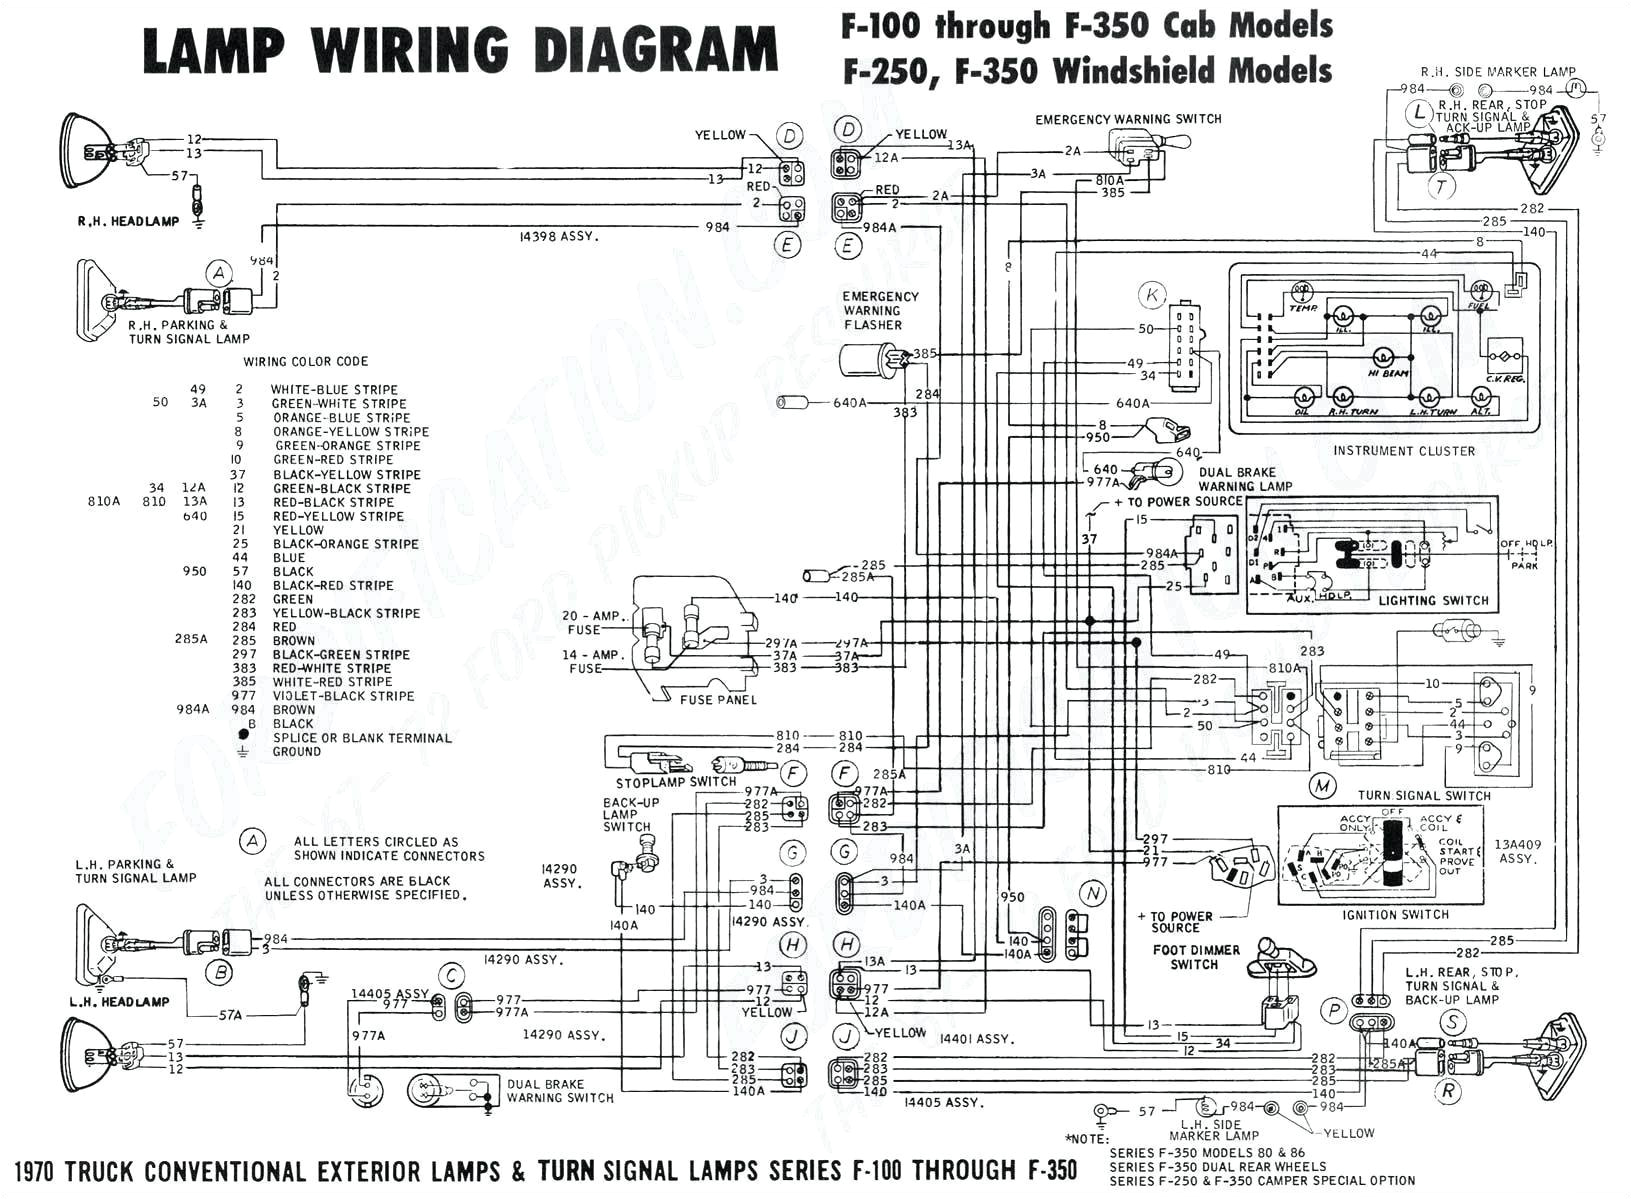 pictures gallery of wiring diagram for alternator with external regulator unique automotive voltage regulator wiring diagram